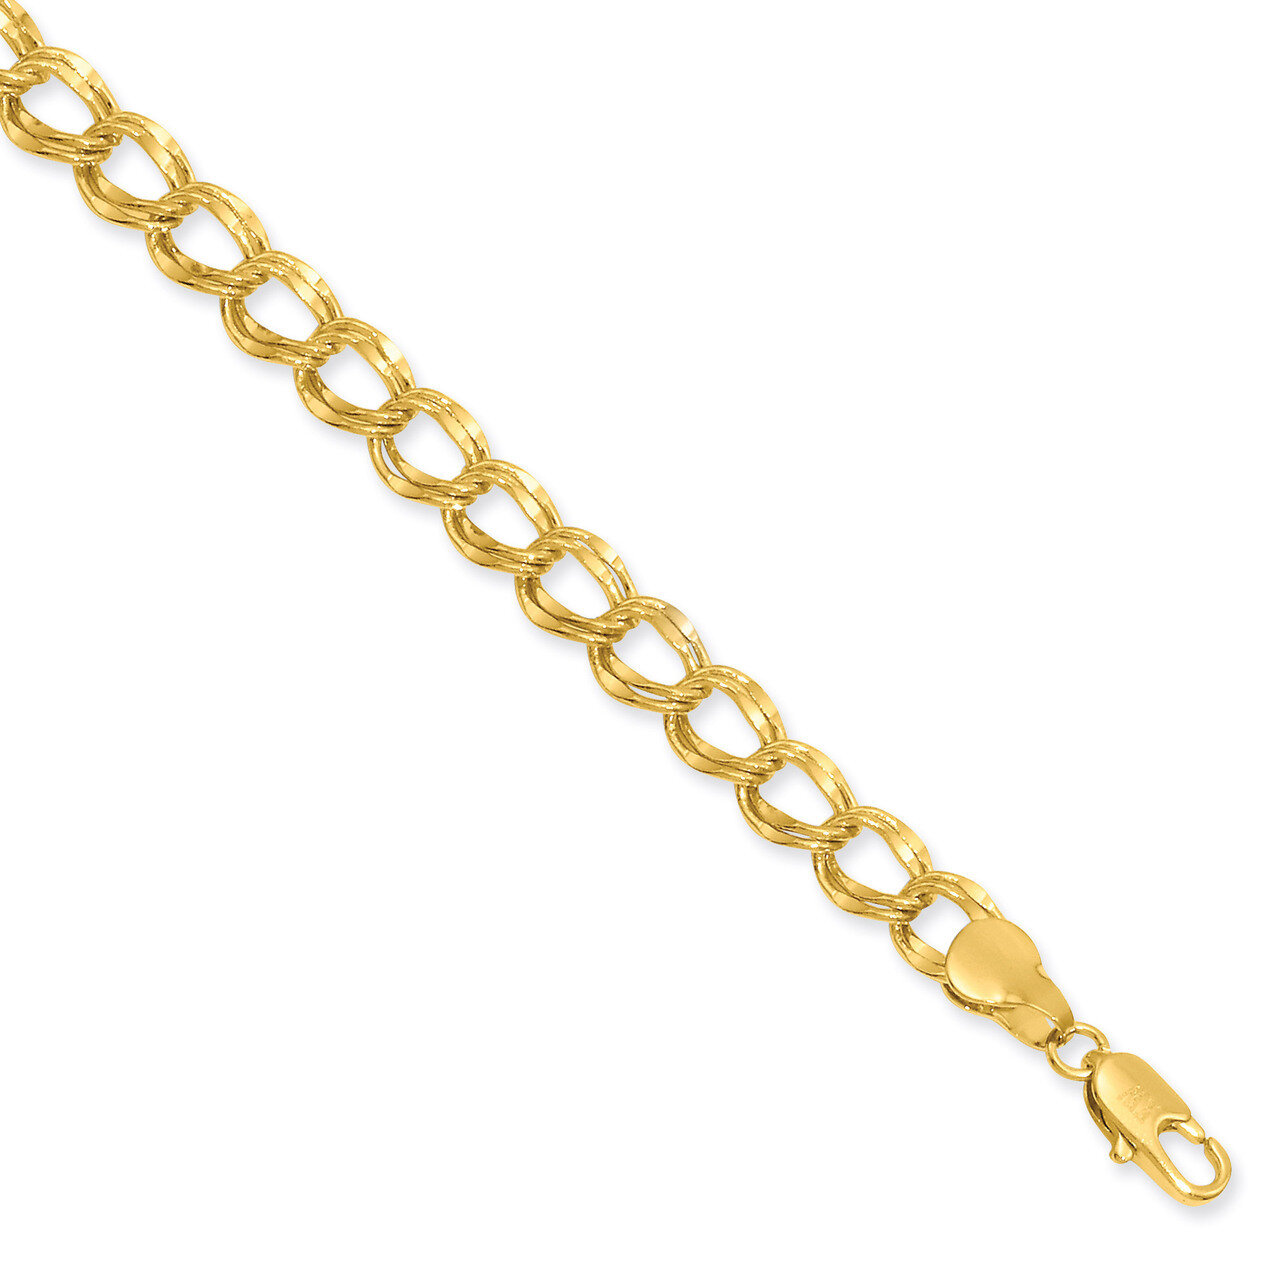 Kelly Waters 6.5mm Double Link Charm Bracelet 7 Inch Gold-plated KW491-7.25